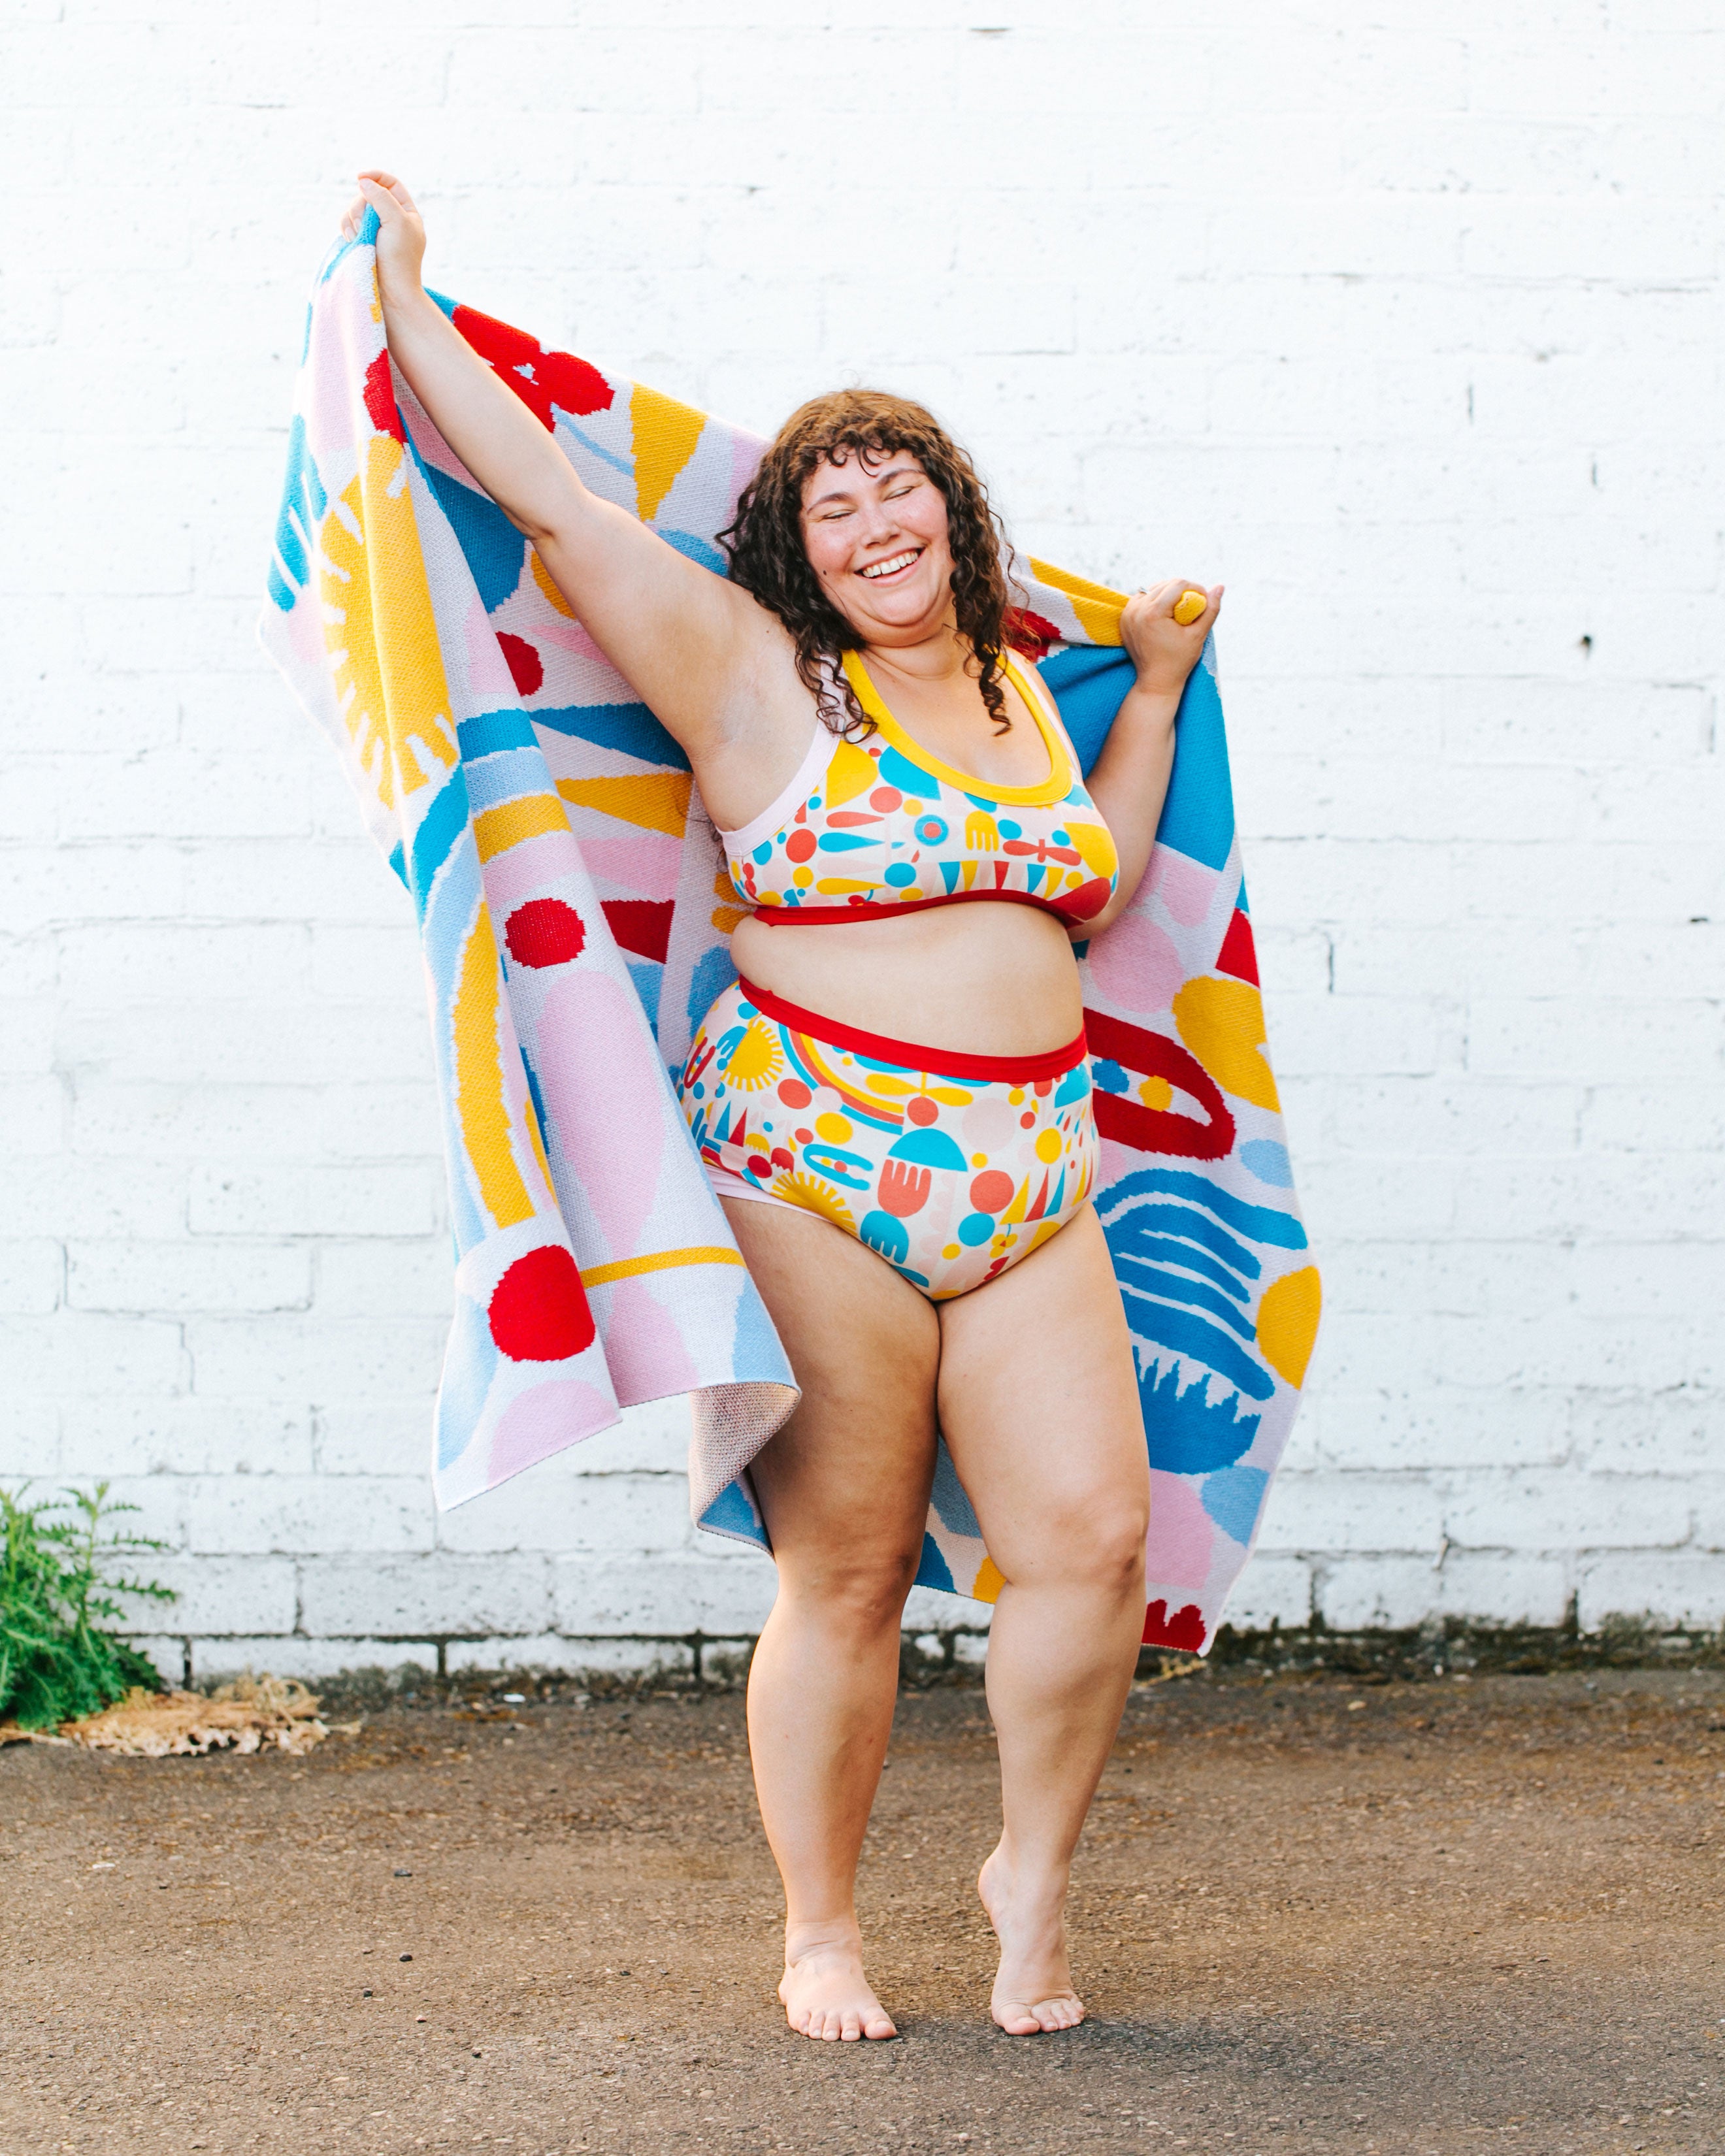 Model smiling and dancing in a set of Original style underwear and Bralette in Balance by Lisa Congdon print: geometric shapes in red, pink, yellow, and blue colors, with a similar blanket around her shoulders.